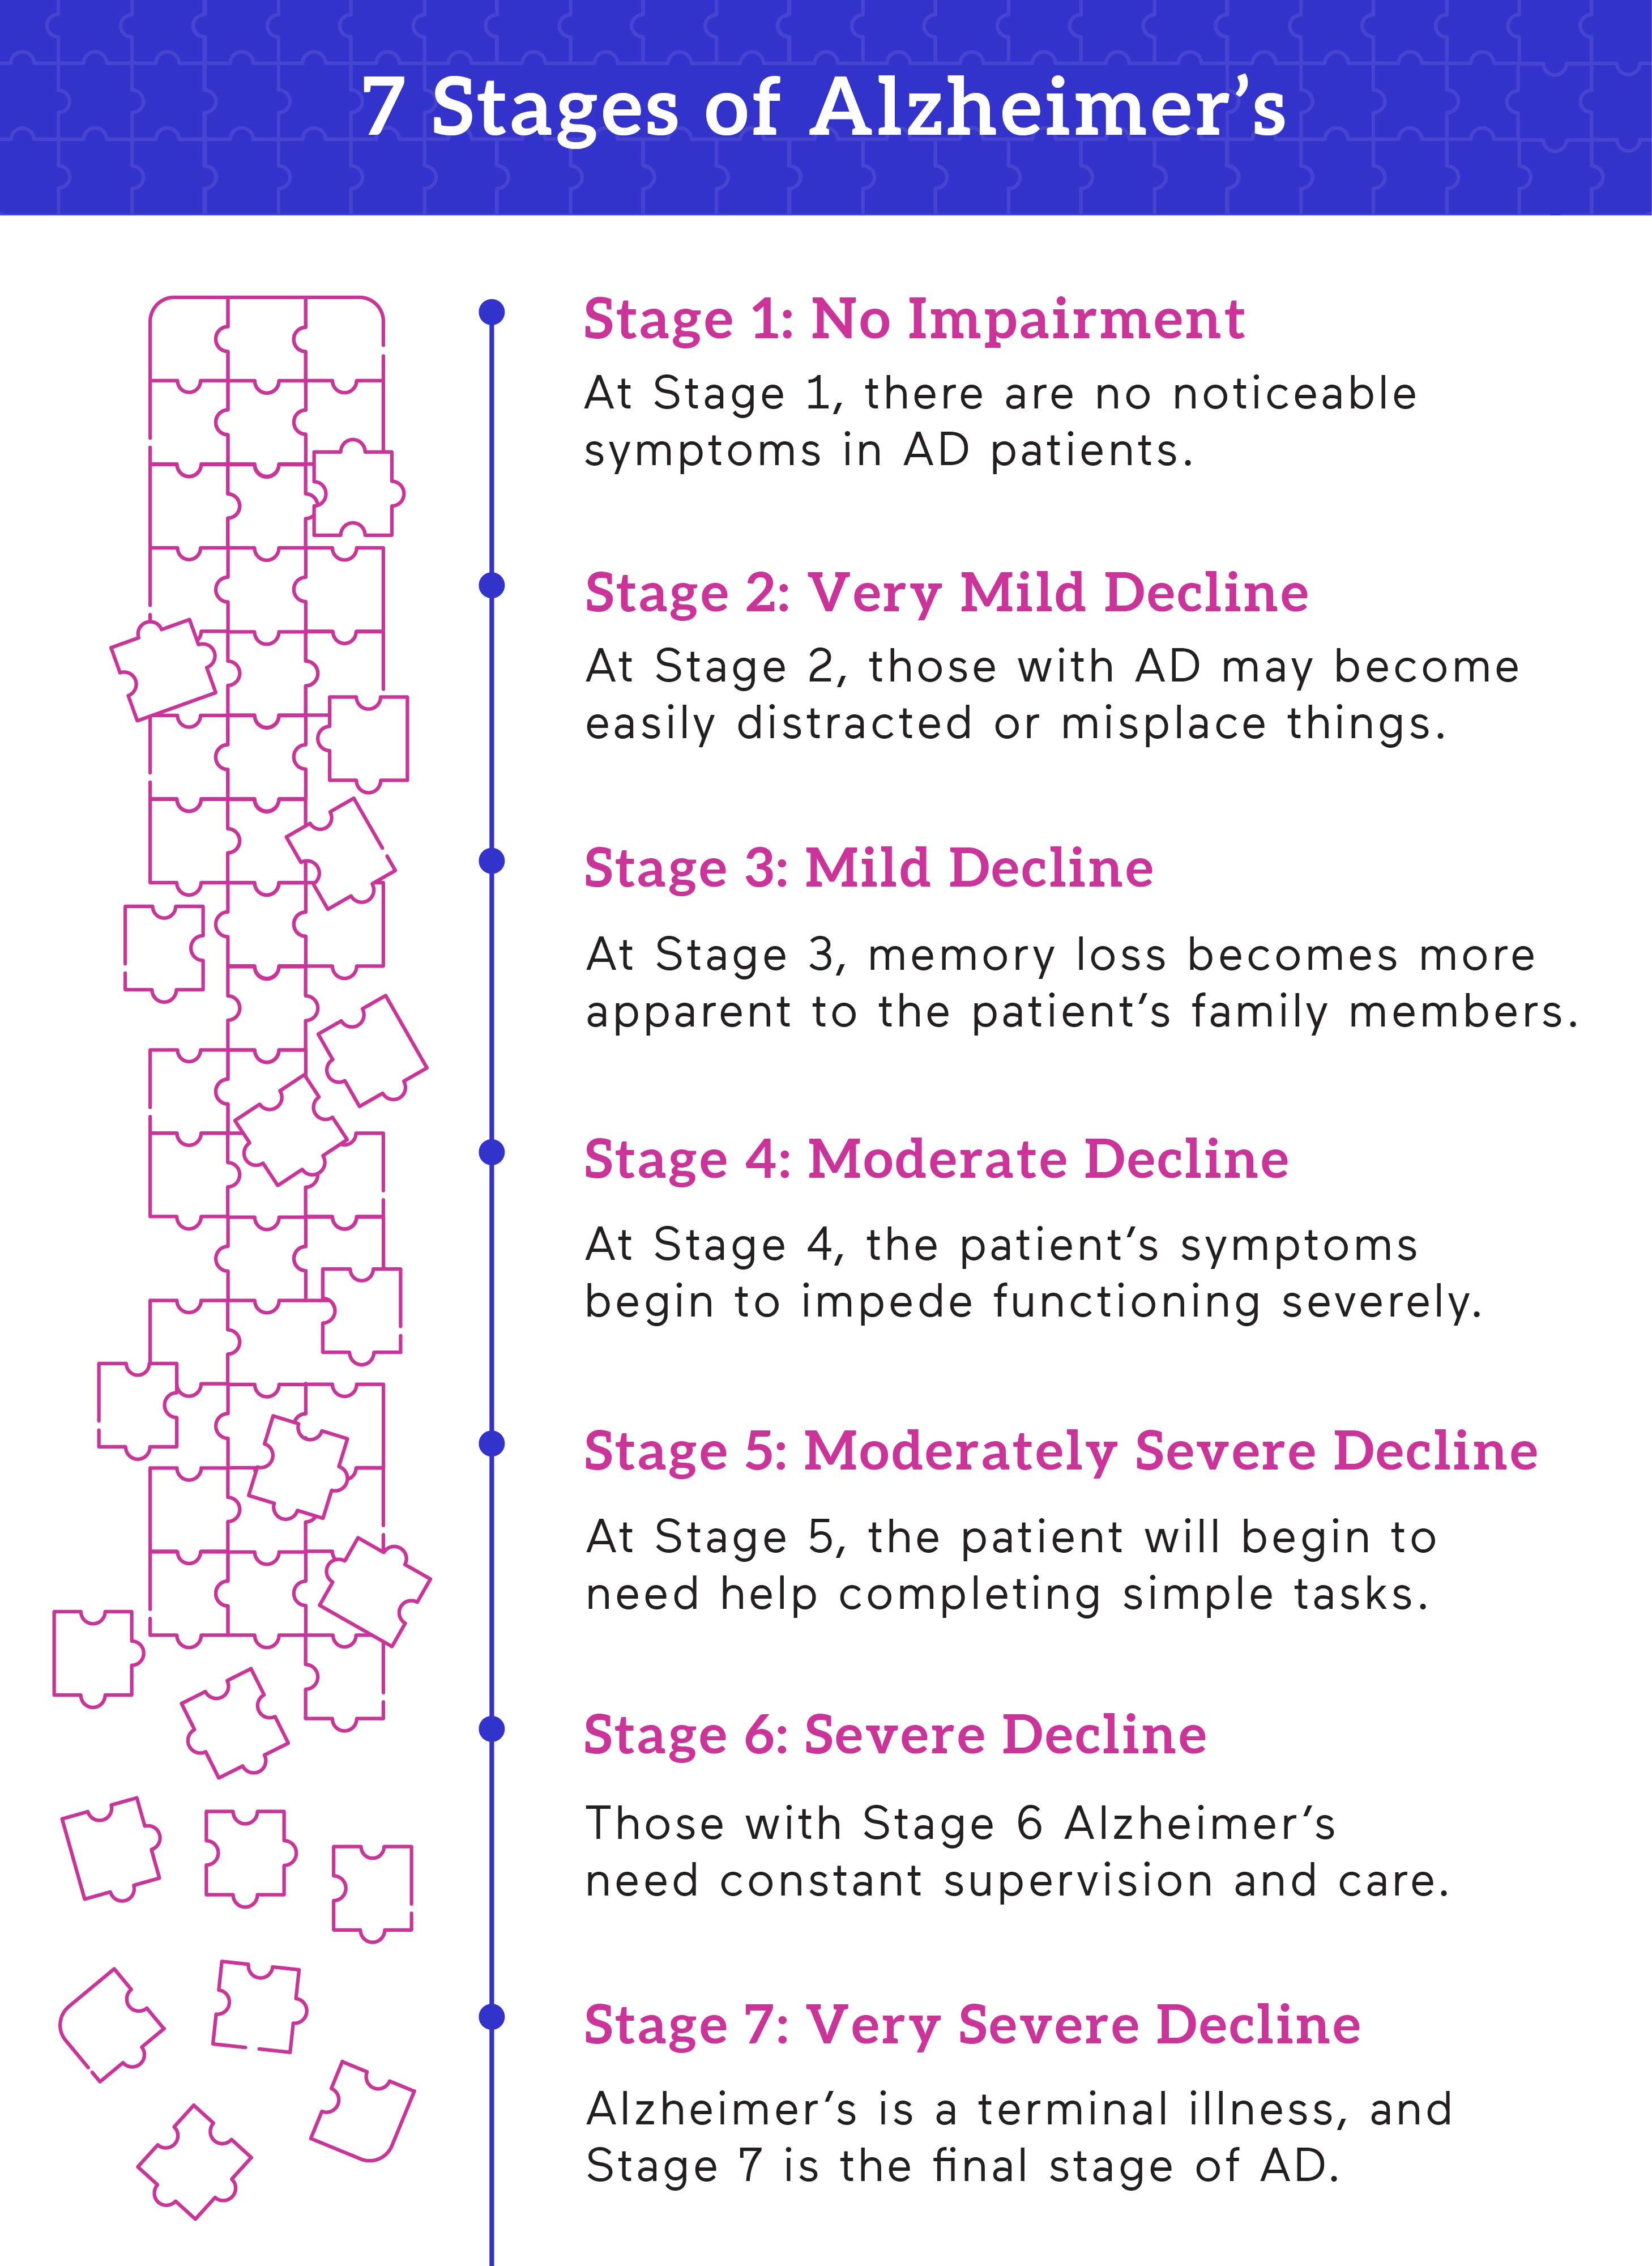 7 Stages of Alzheimer's